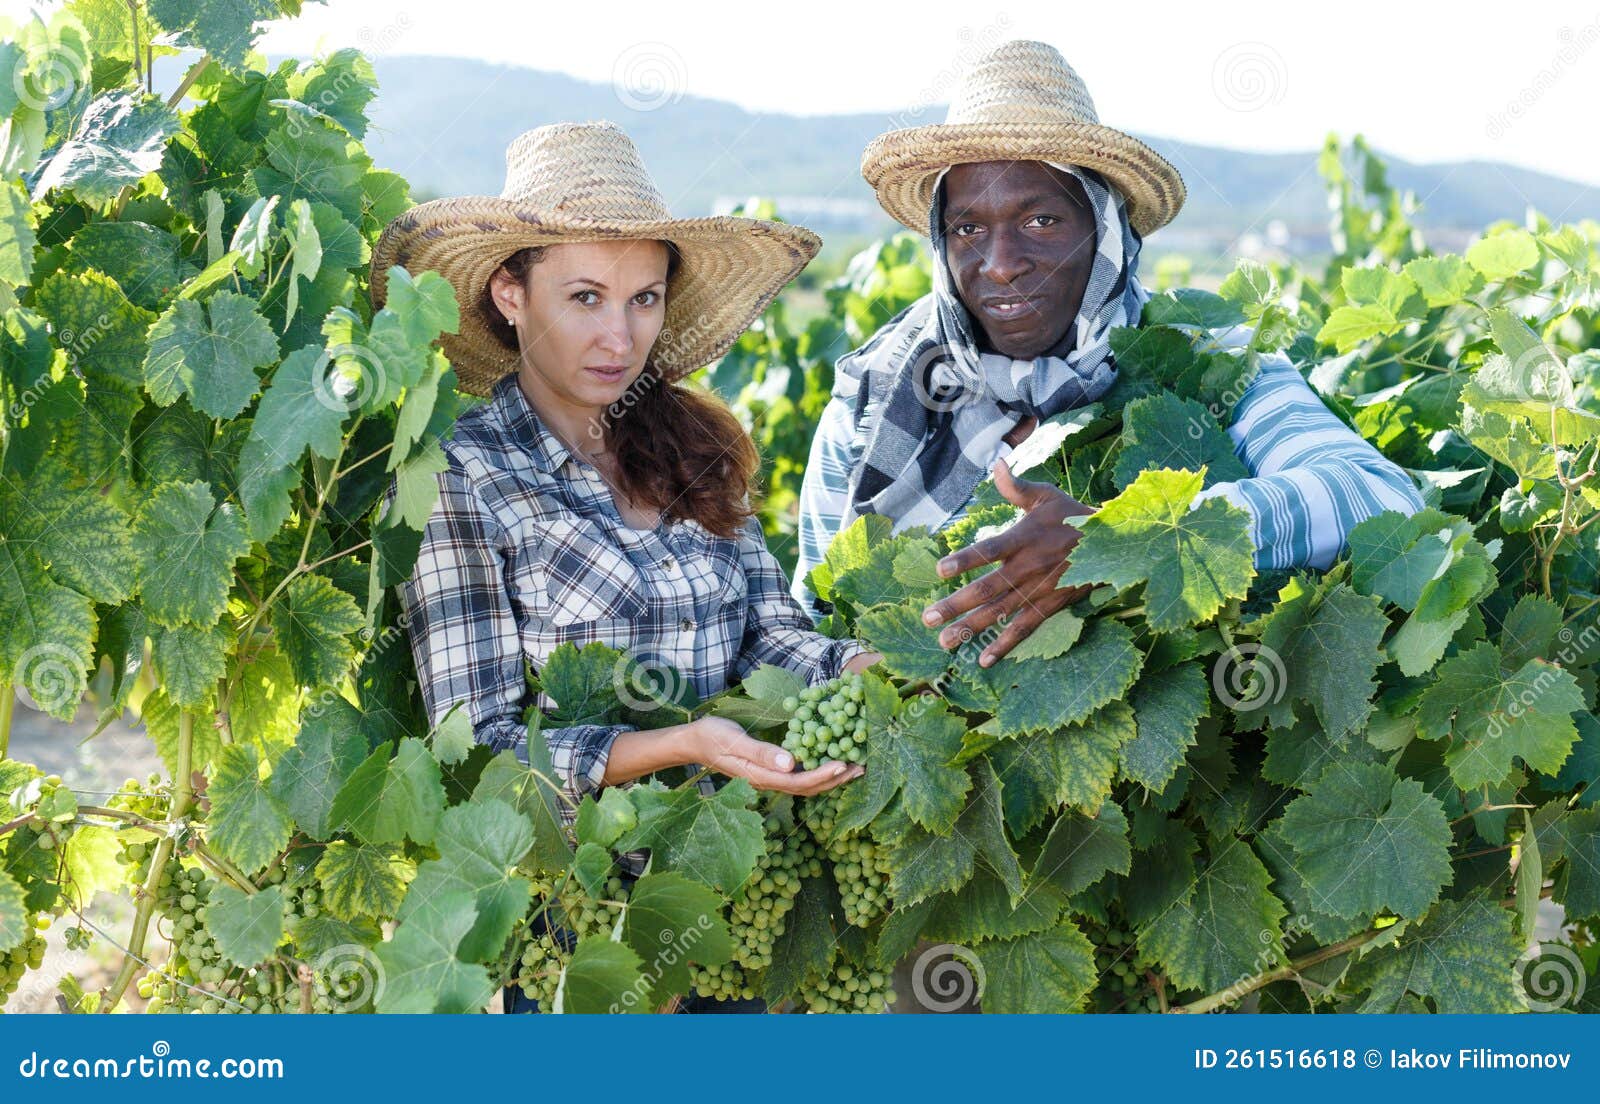 winemakers checking grapes quality